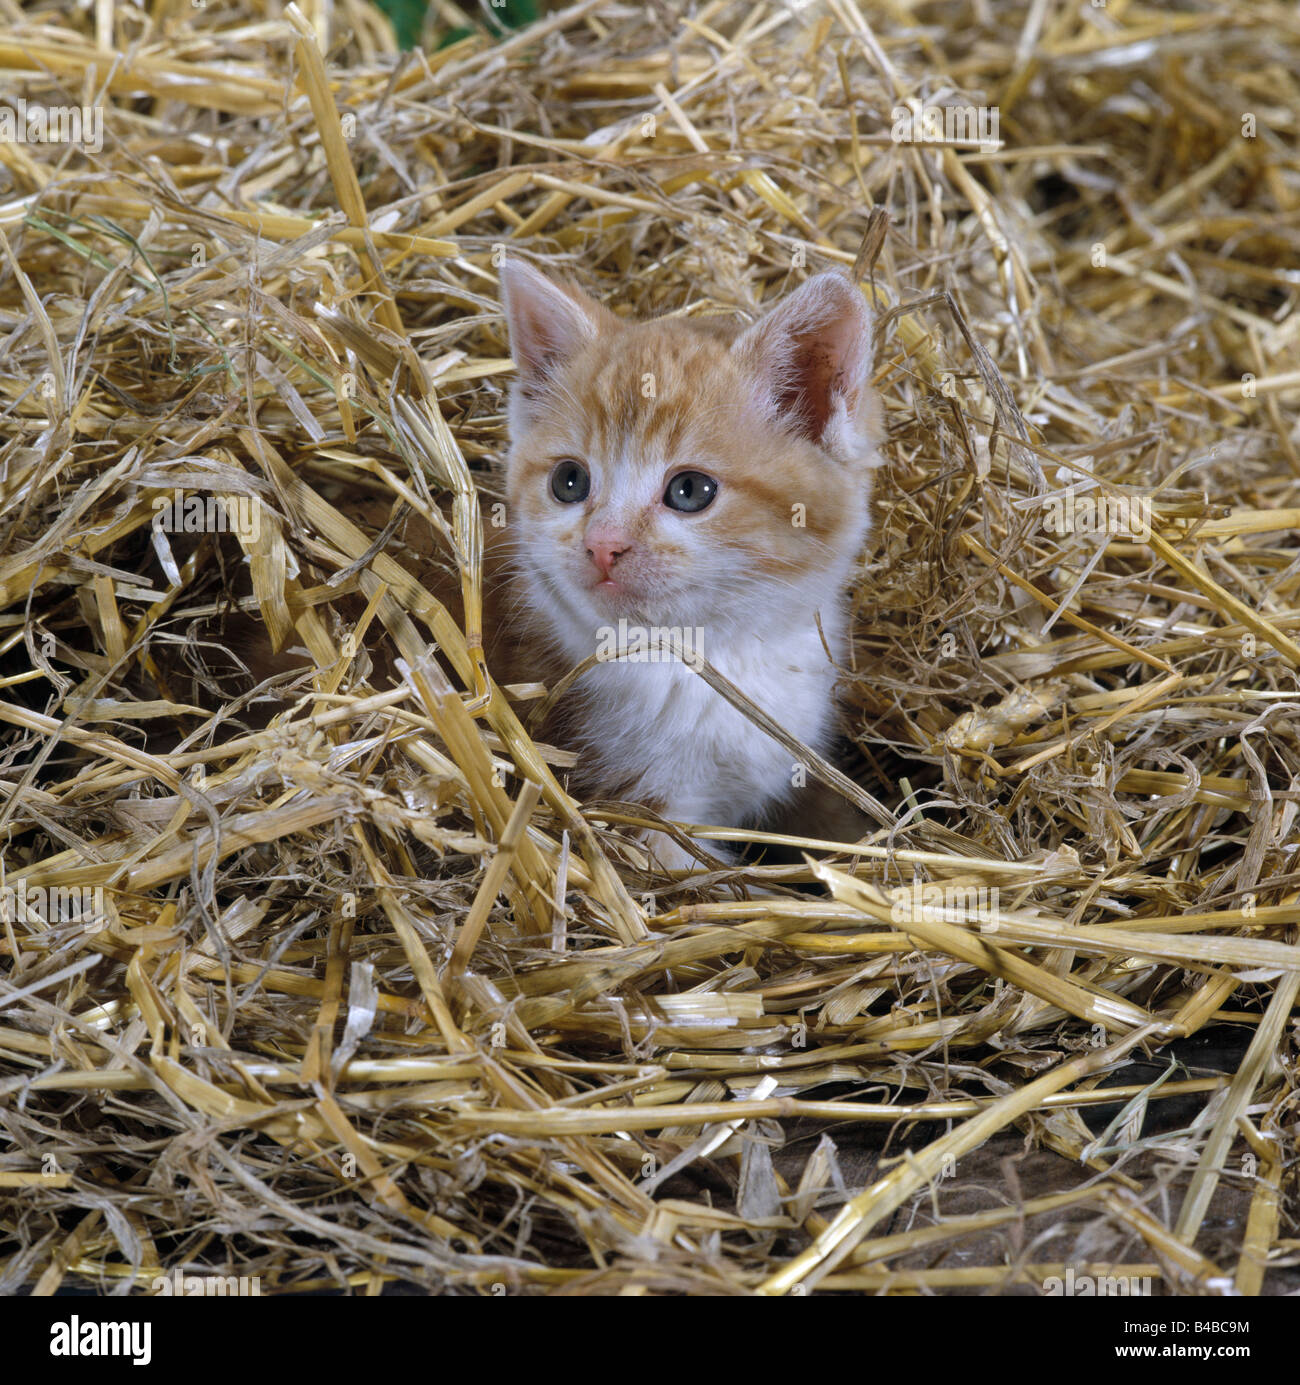 https://c8.alamy.com/comp/B4BC9M/cat-ginger-and-tabby-farm-kittens-playing-in-straw-B4BC9M.jpg